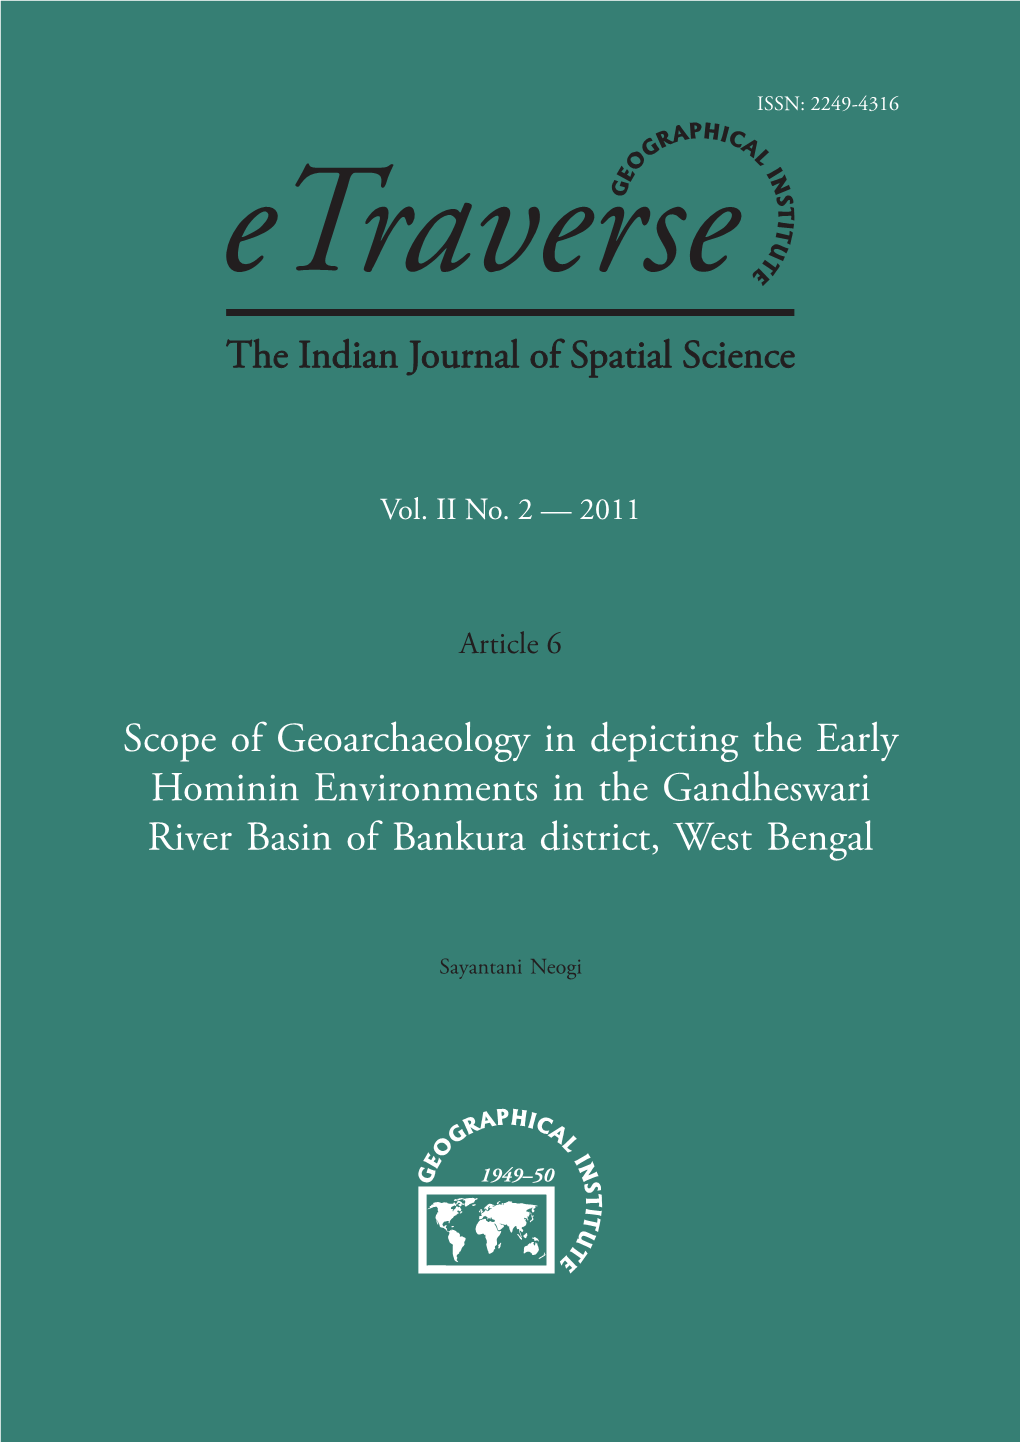 Scope of Geoarchaeology in Depicting the Early Hominin Environments in the Gandheswari River Basin of Bankura District, West Bengal